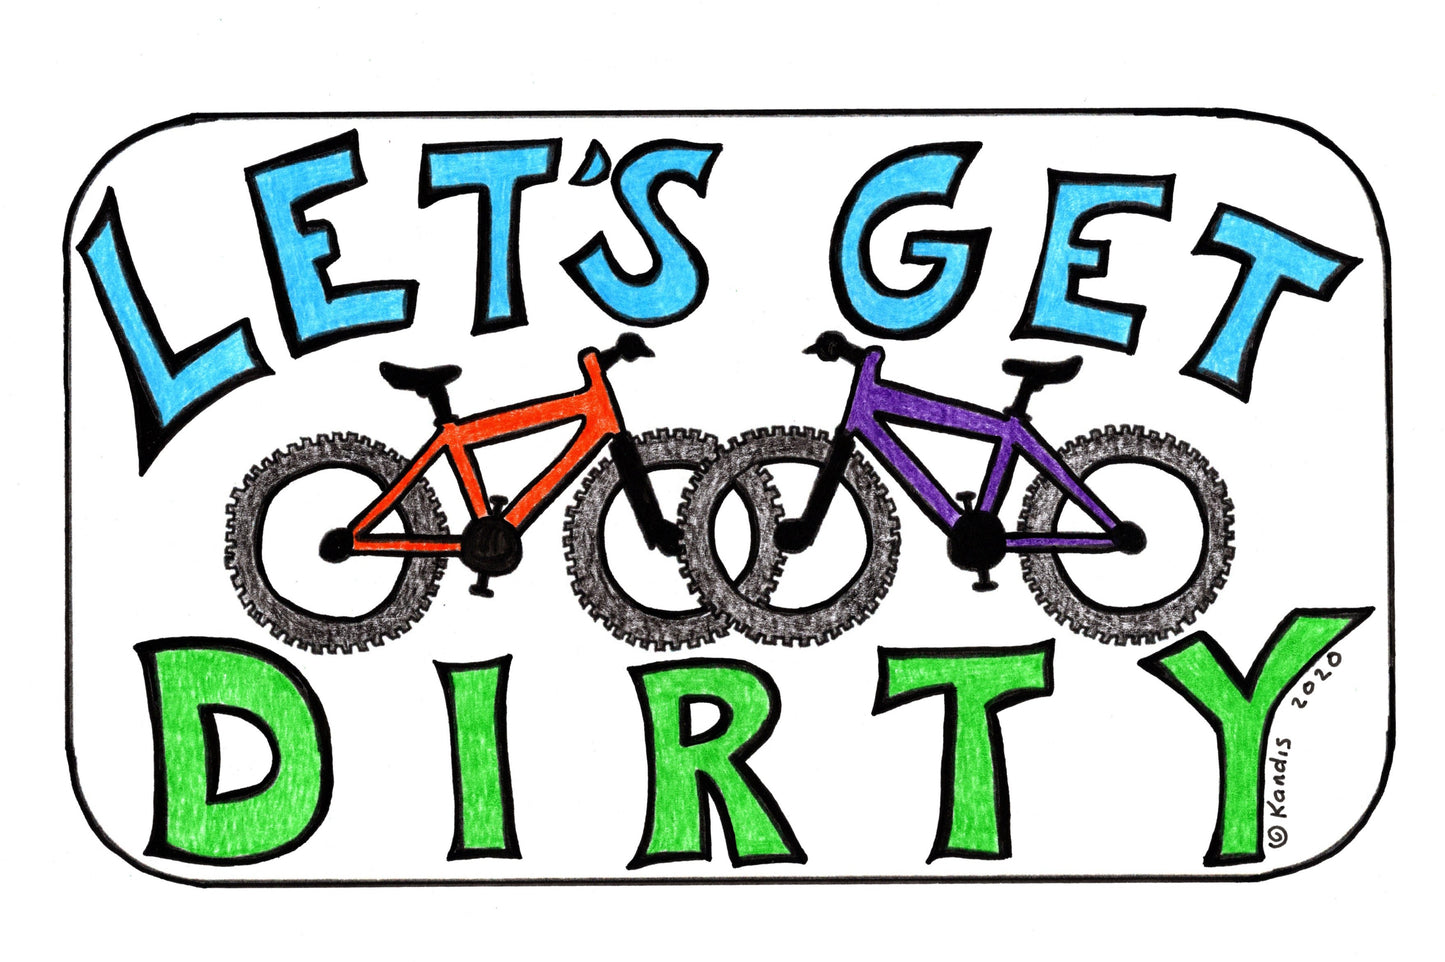 Let's Get Dirty